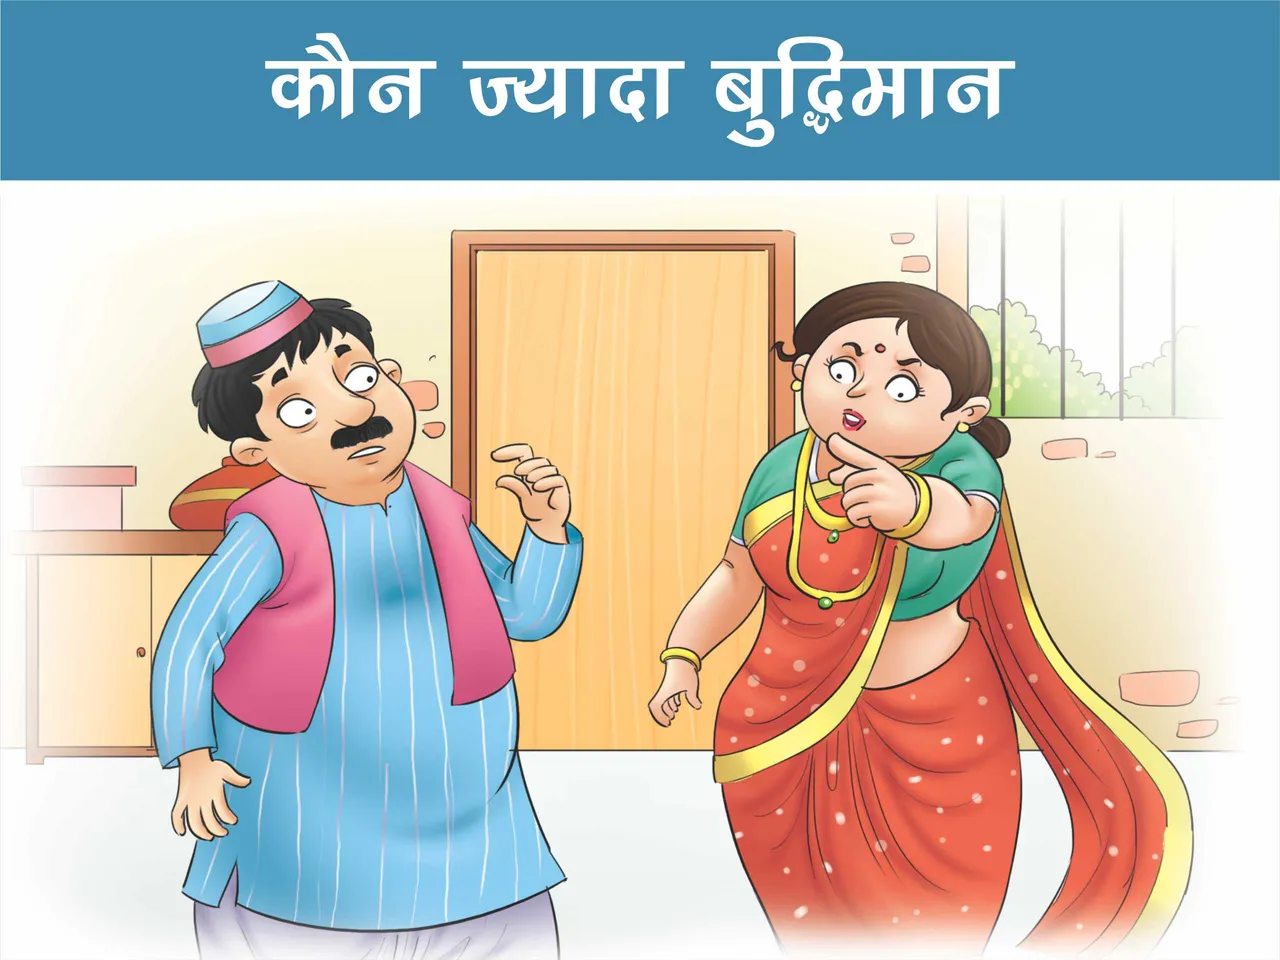 Cartoon image of a man with his wife